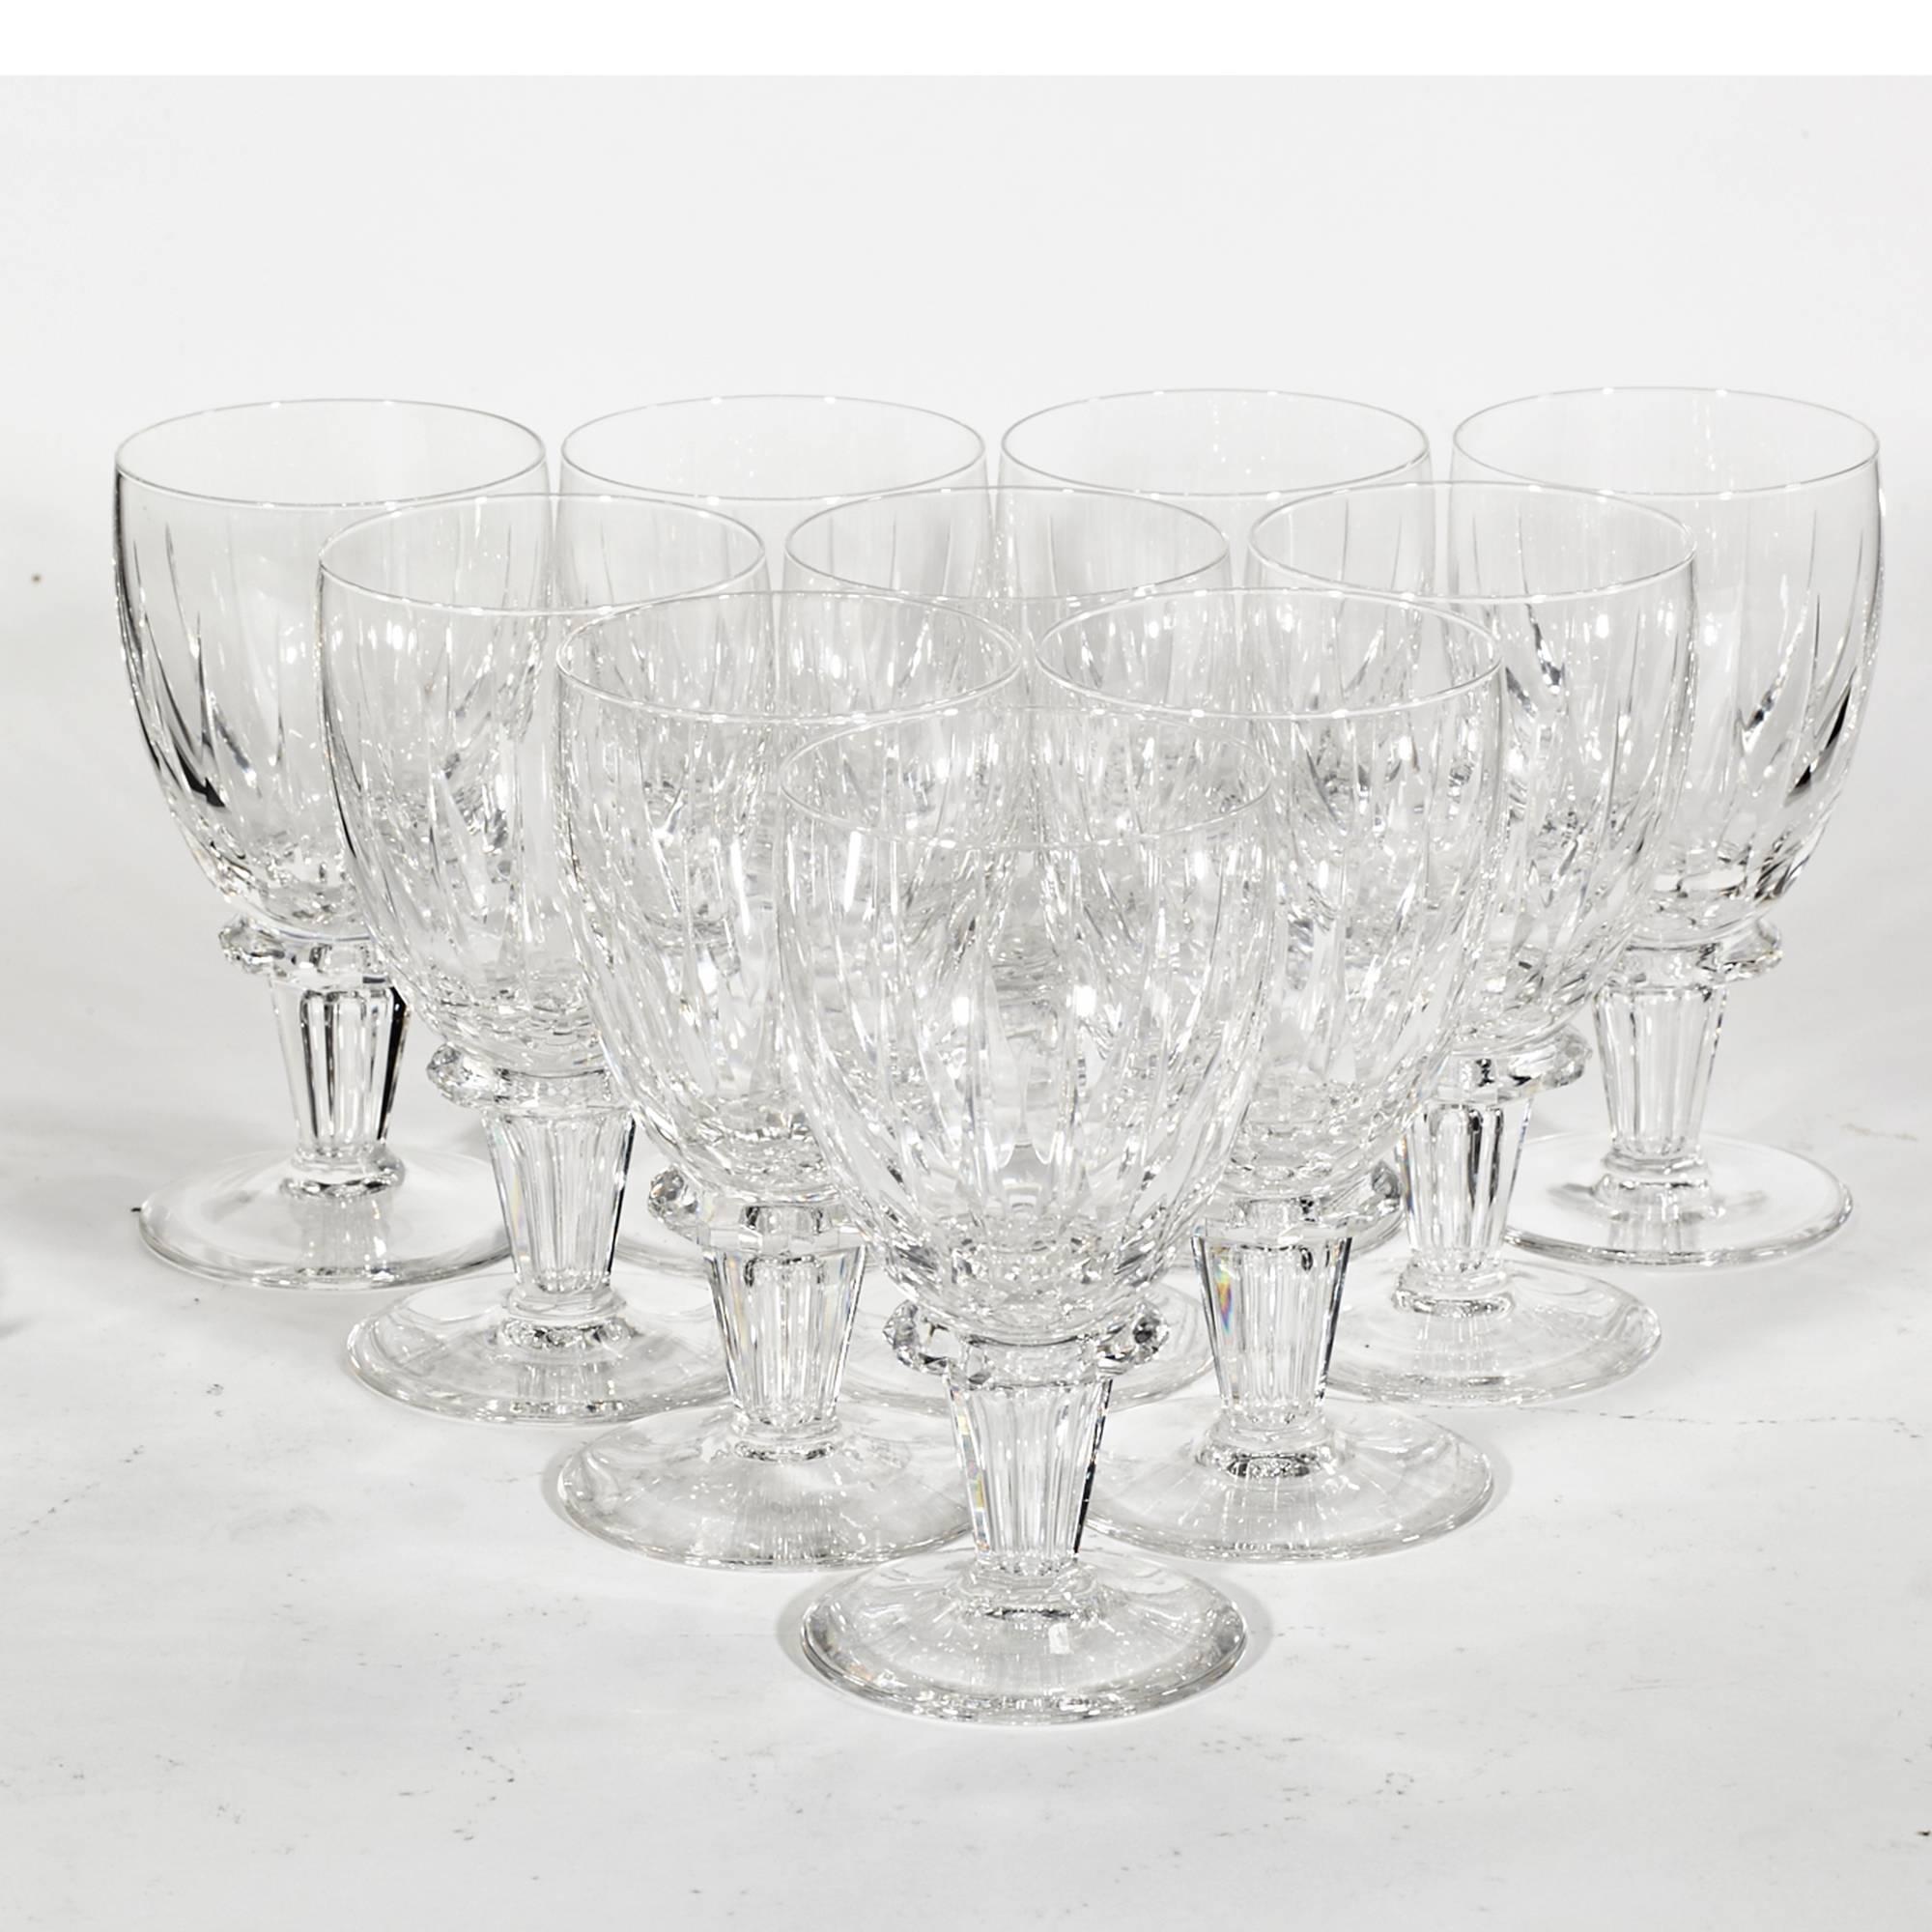 Vintage Dutch royal Leerdam glass goblets in the Rondo pattern, set of ten. The Rondo pattern has been out of production since 1980. It features deep vertical cuts on the bowl, with a unique notched wafer stem. One stem has a small rim nick.